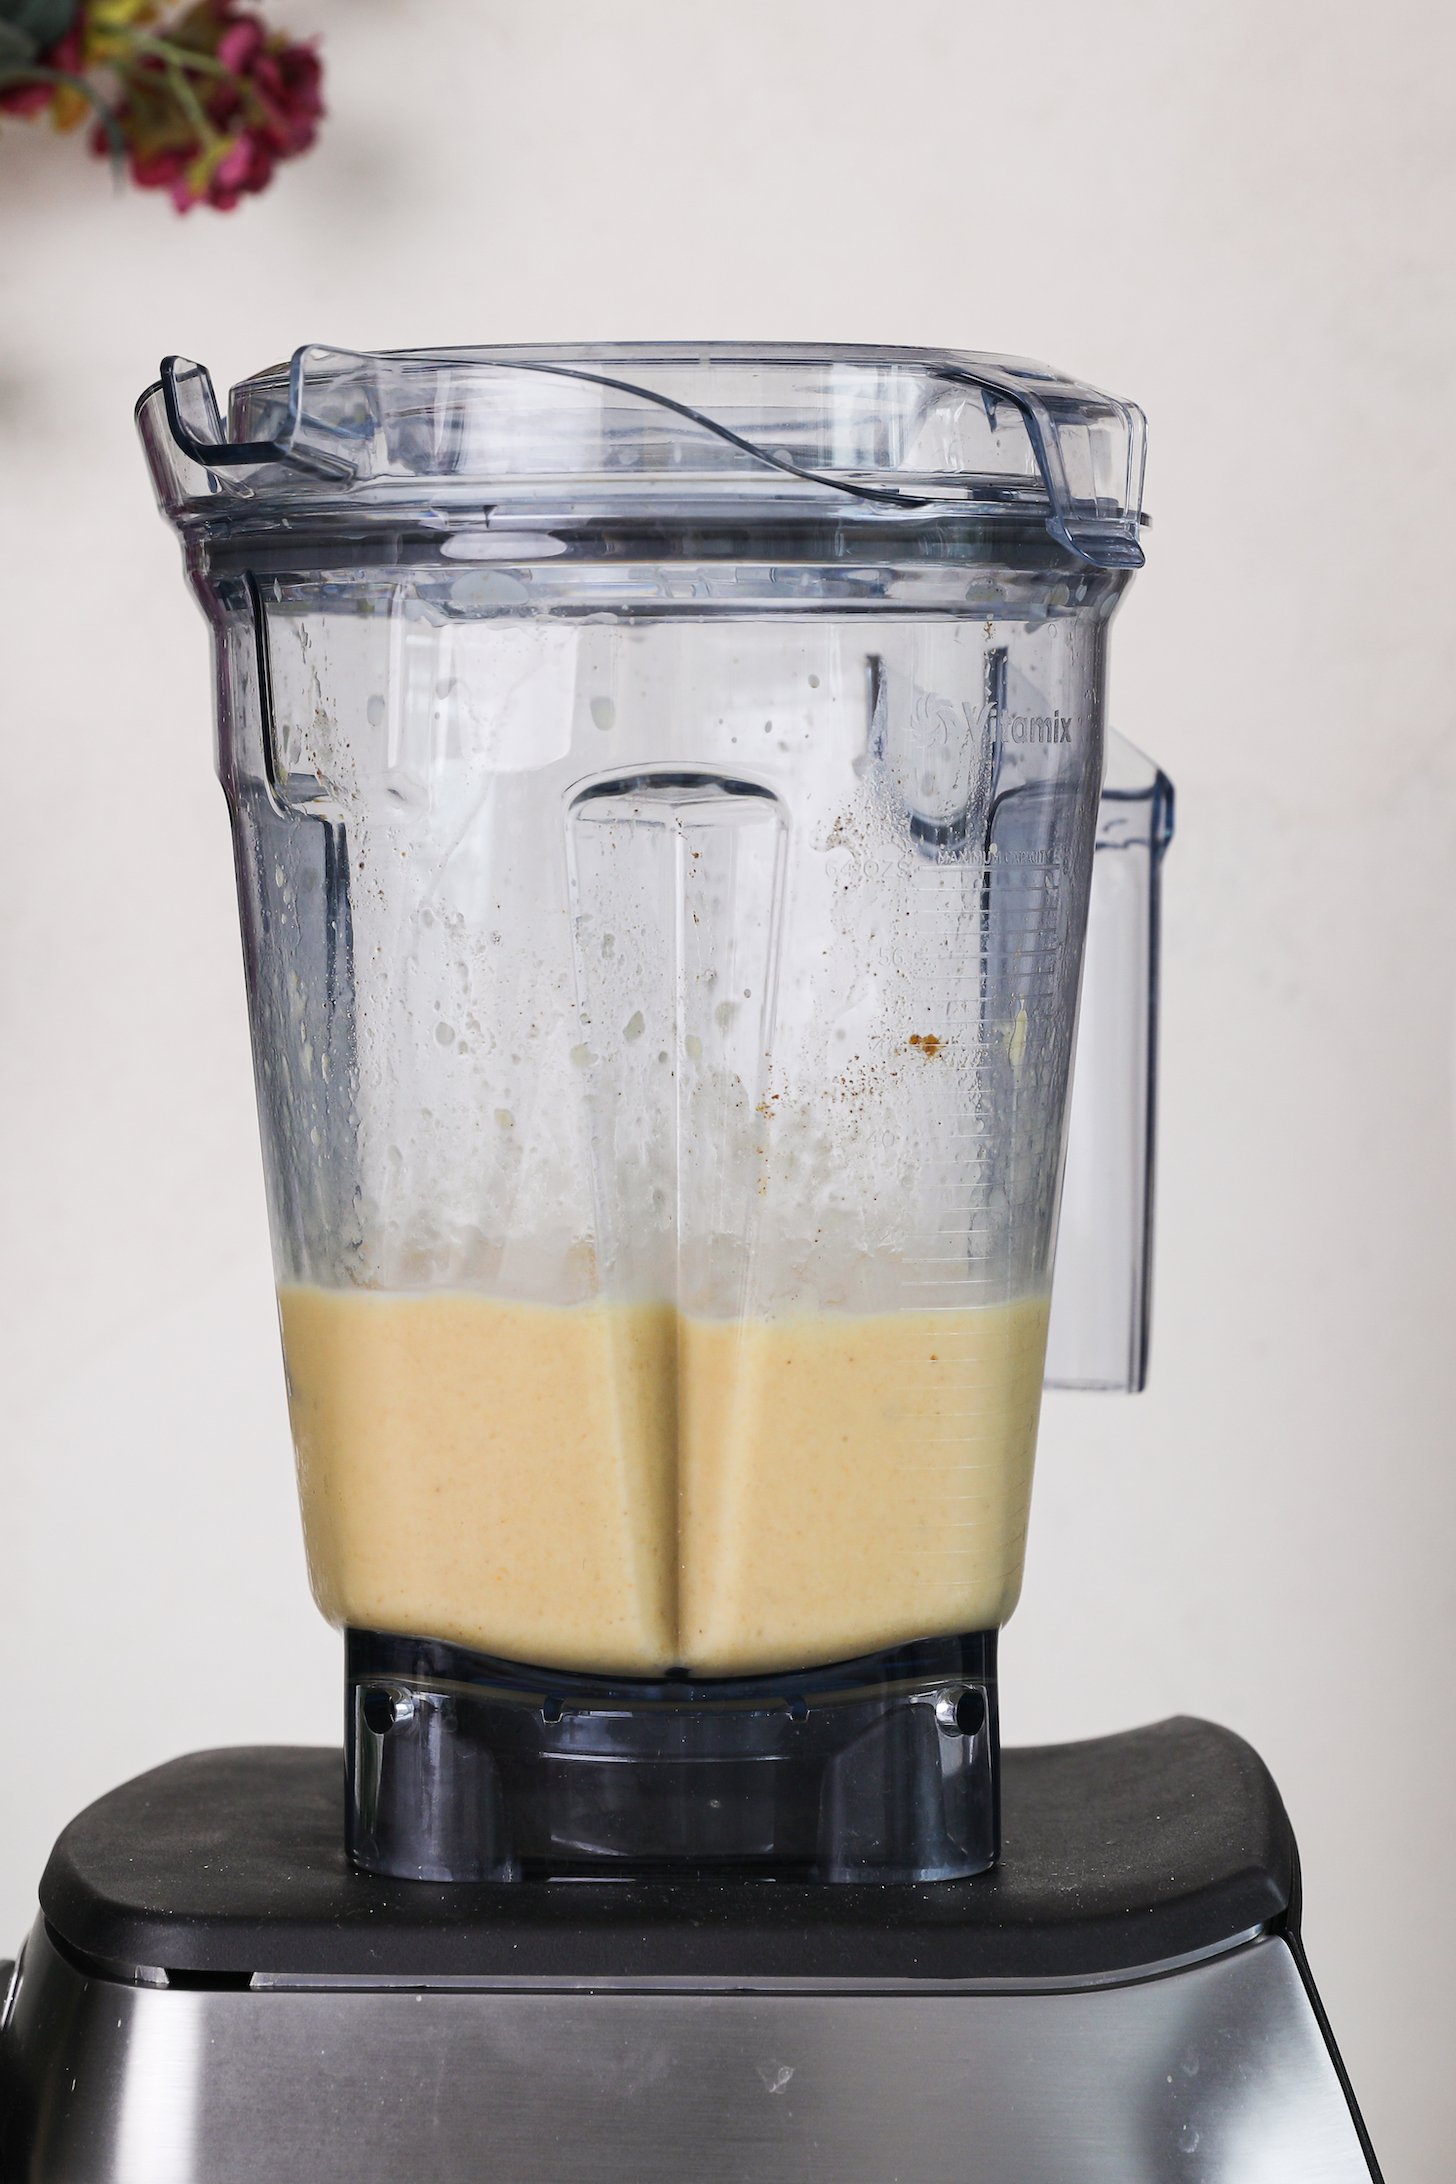 Perspective image of a blender with a yellow mixture in it.